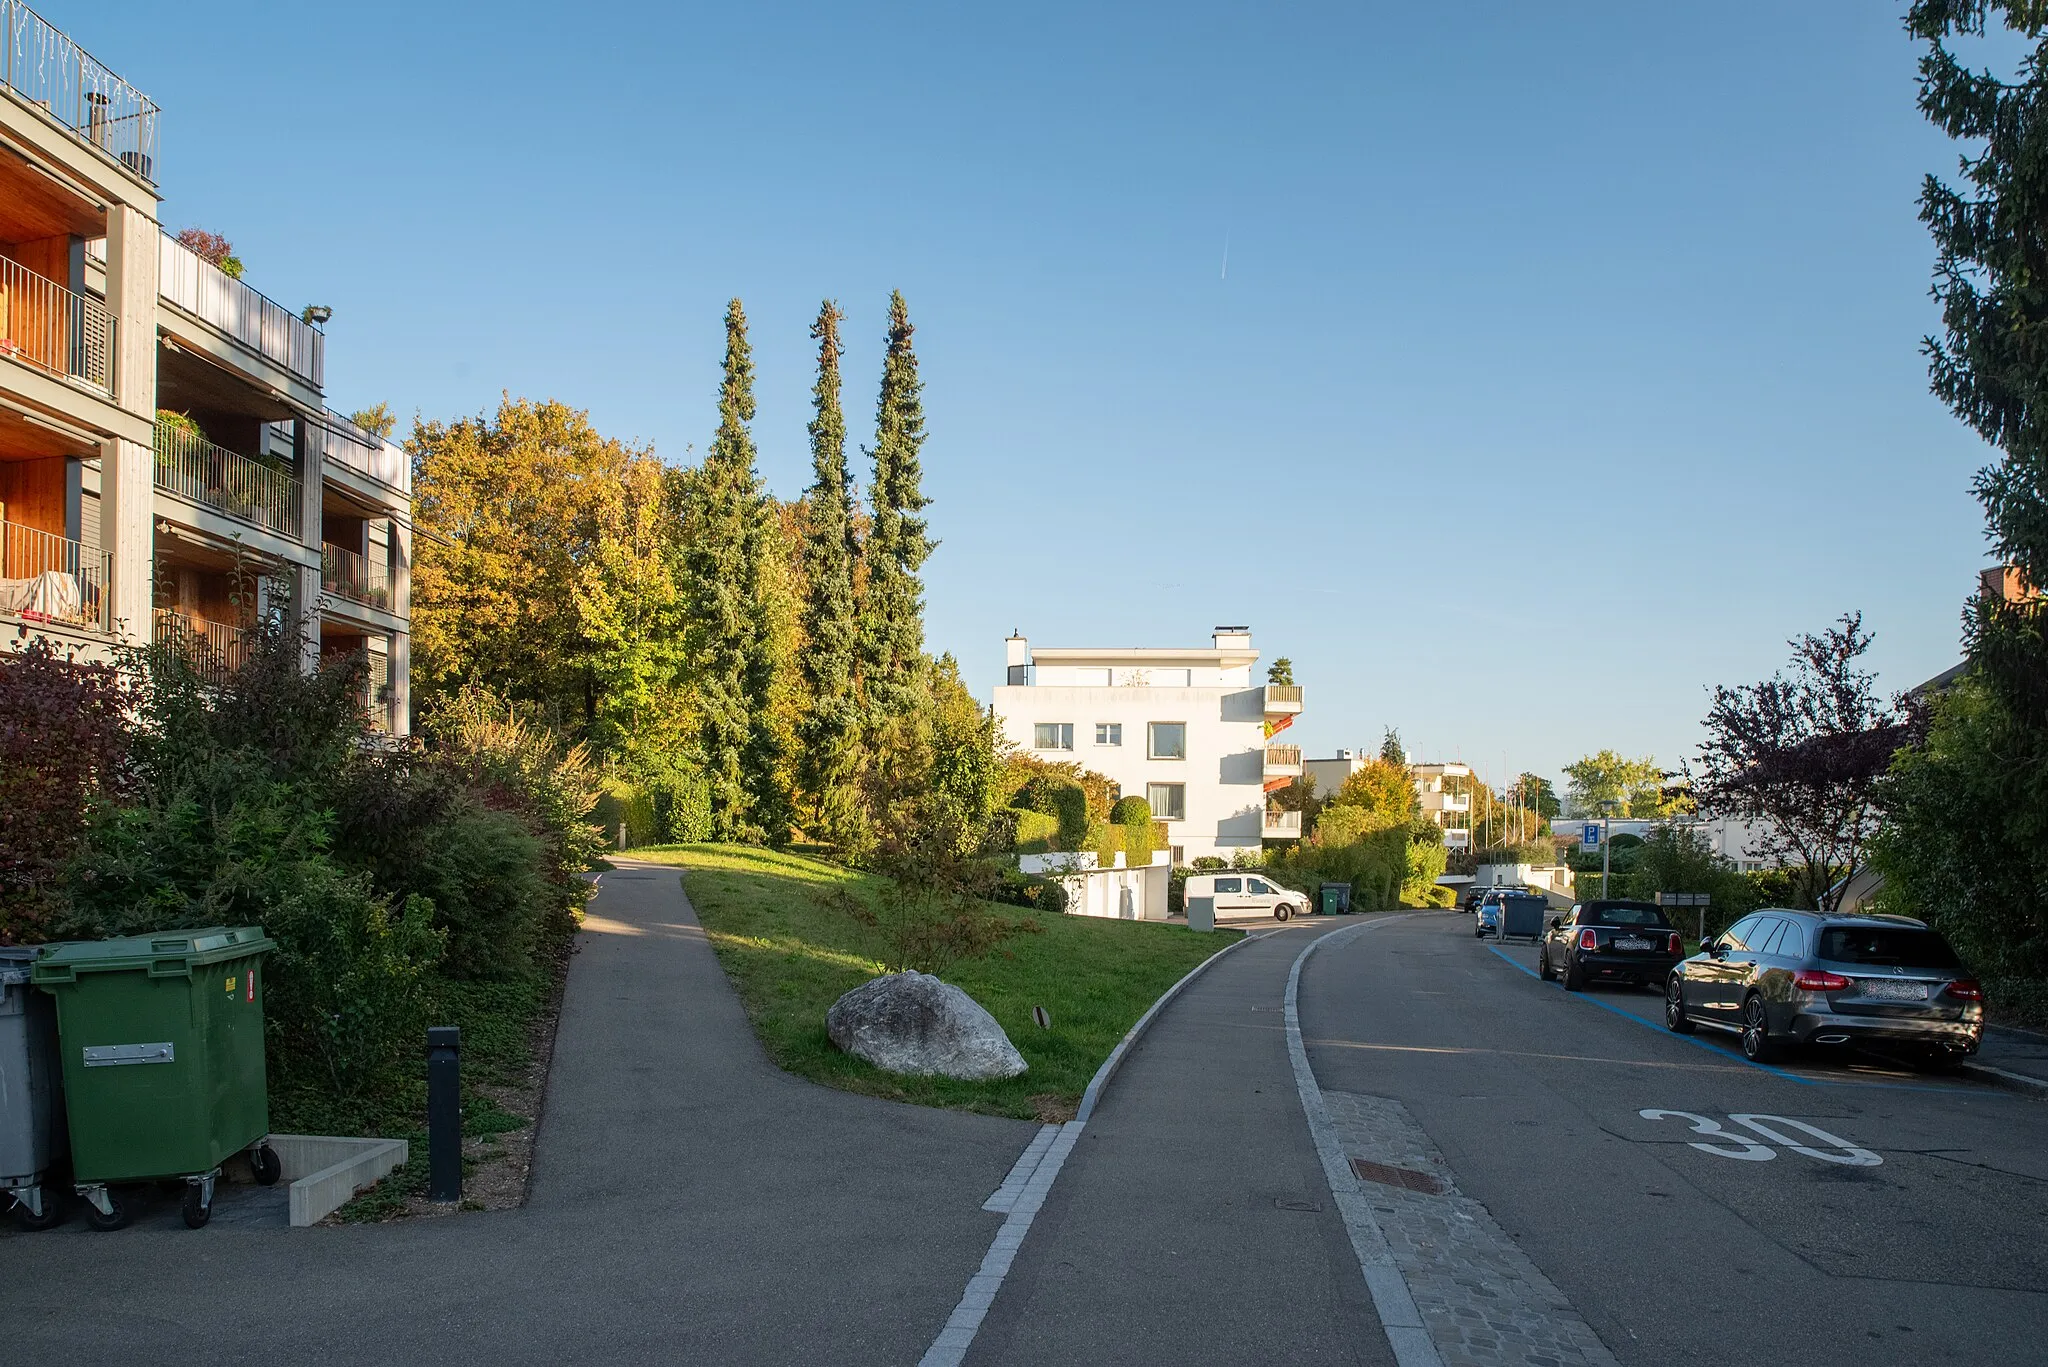 Photo showing: Am Oeschbrig in Zürich: a road with a 30 km/h limitation painted on it, 3-story residential buildings on each side, and cars parked on blue parking spots. There's three high, thin trees in the background.